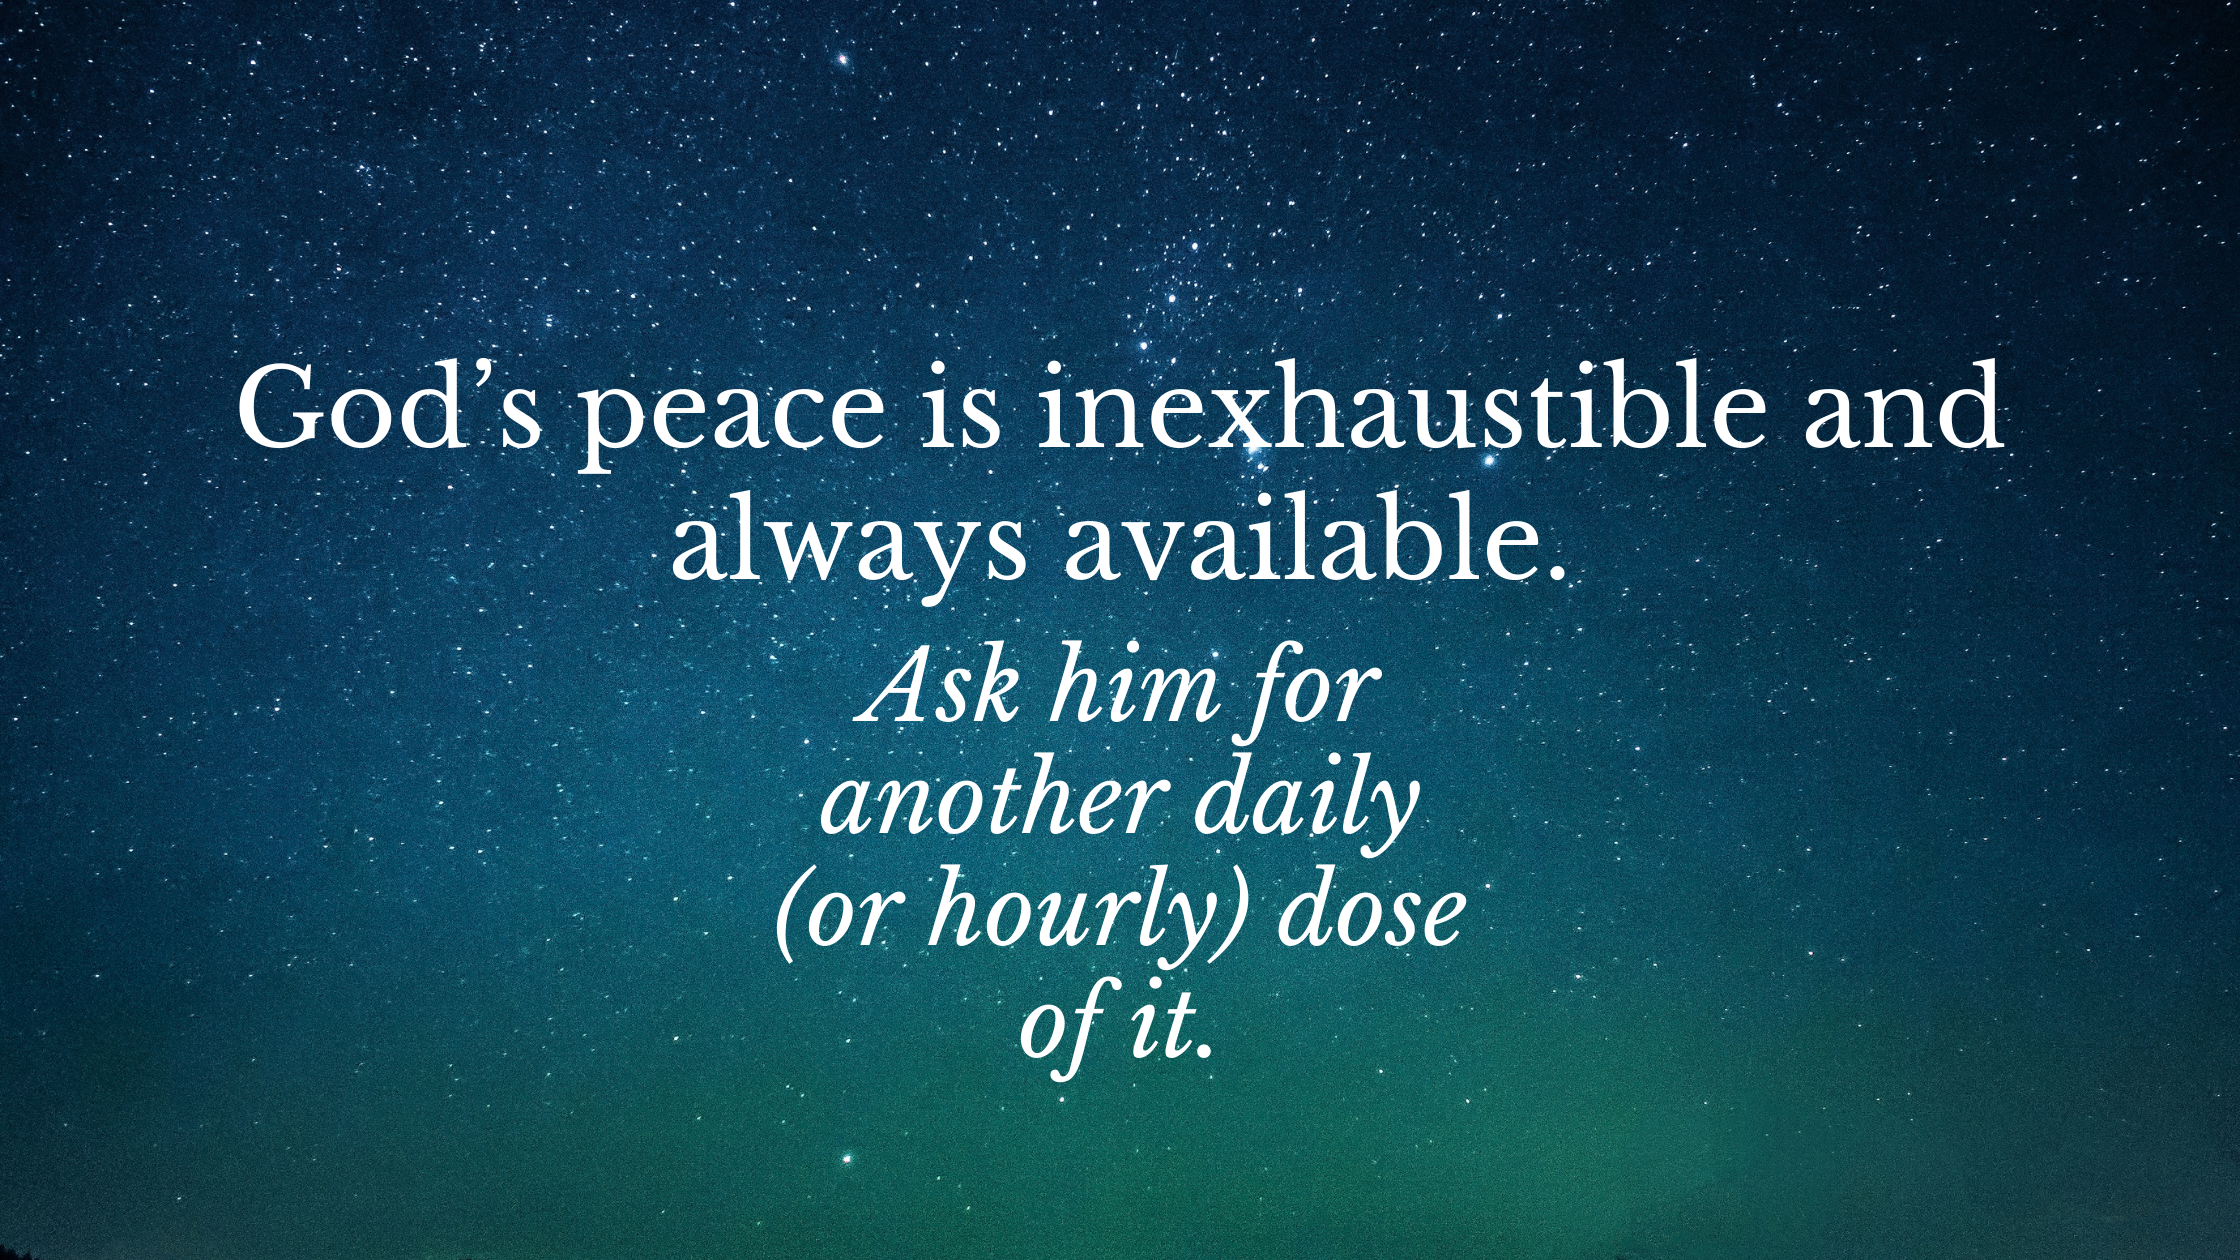 God’s peace is inexhaustible and always available.